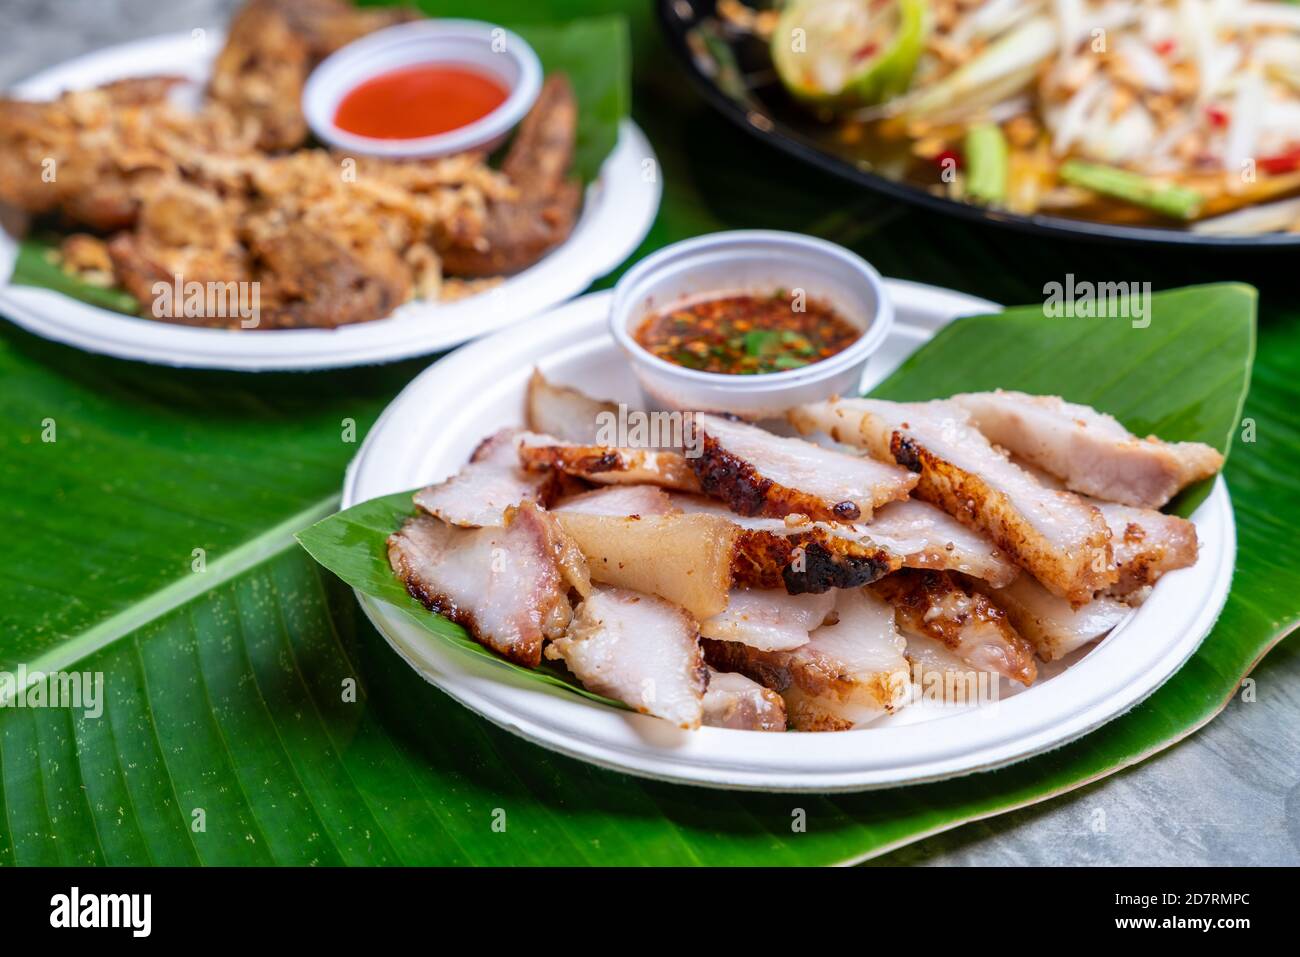 Street food Grilled Pork Neck, Grilled Pork With Spicy sauce is one of the  most popular Thai dishes. Thai Food Stock Photo - Alamy